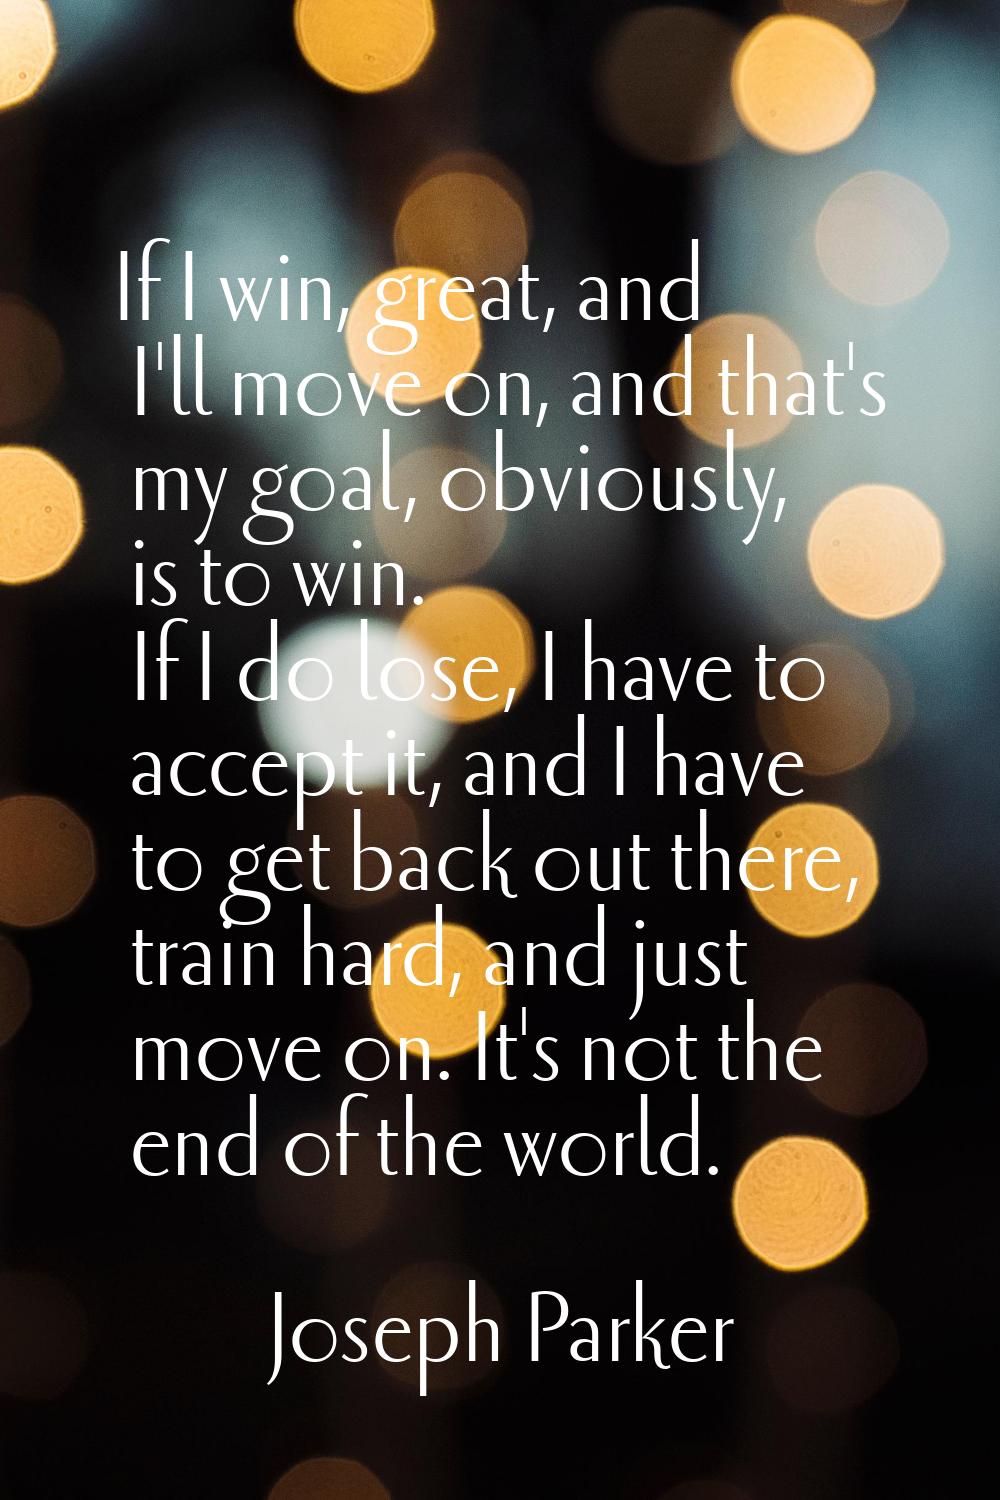 If I win, great, and I'll move on, and that's my goal, obviously, is to win. If I do lose, I have t